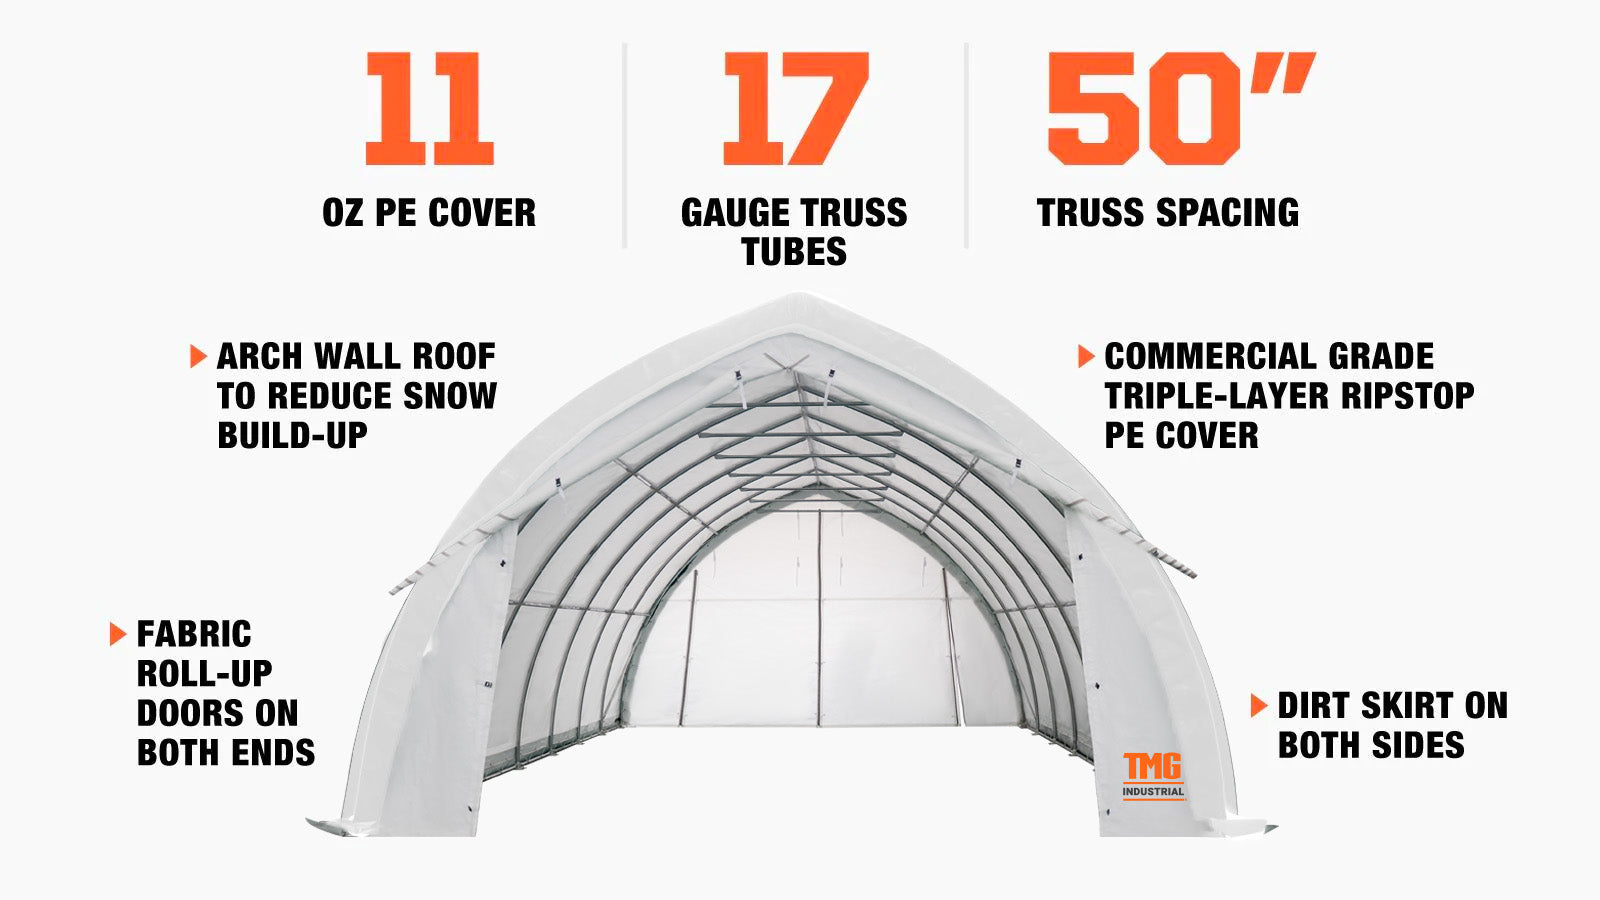 TMG Industrial 20' x 30' Arch Wall Peak Ceiling Storage Shelter with Heavy Duty 11 oz PE Cover & Drive Through Doors, TMG-ST2031P (Previously ST2030P)-description-image